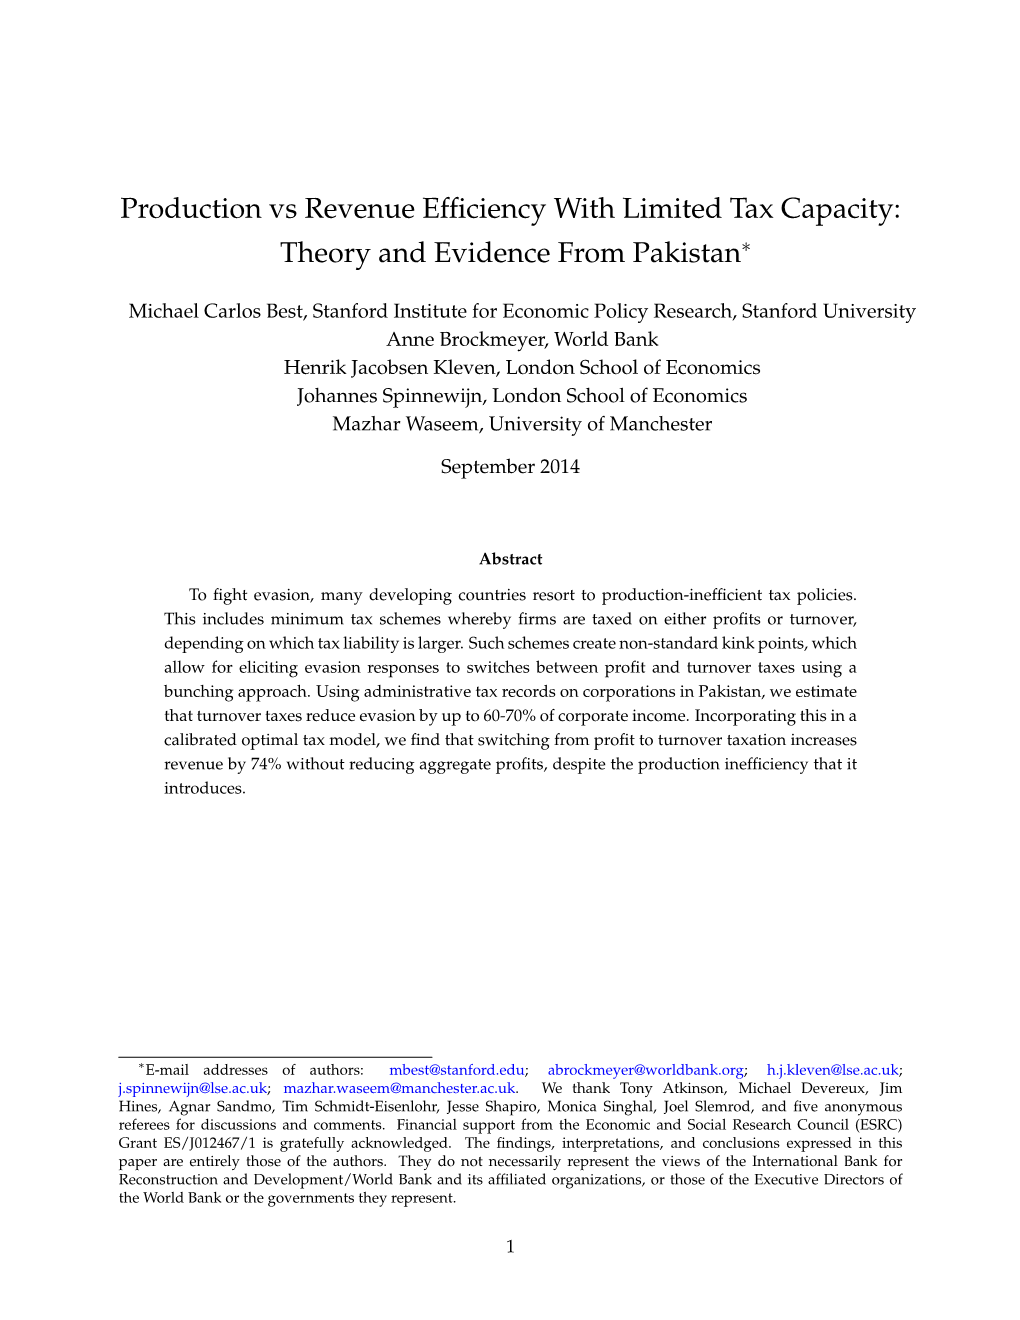 Production Vs Revenue Efficiency with Limited Tax Capacity: Theory And